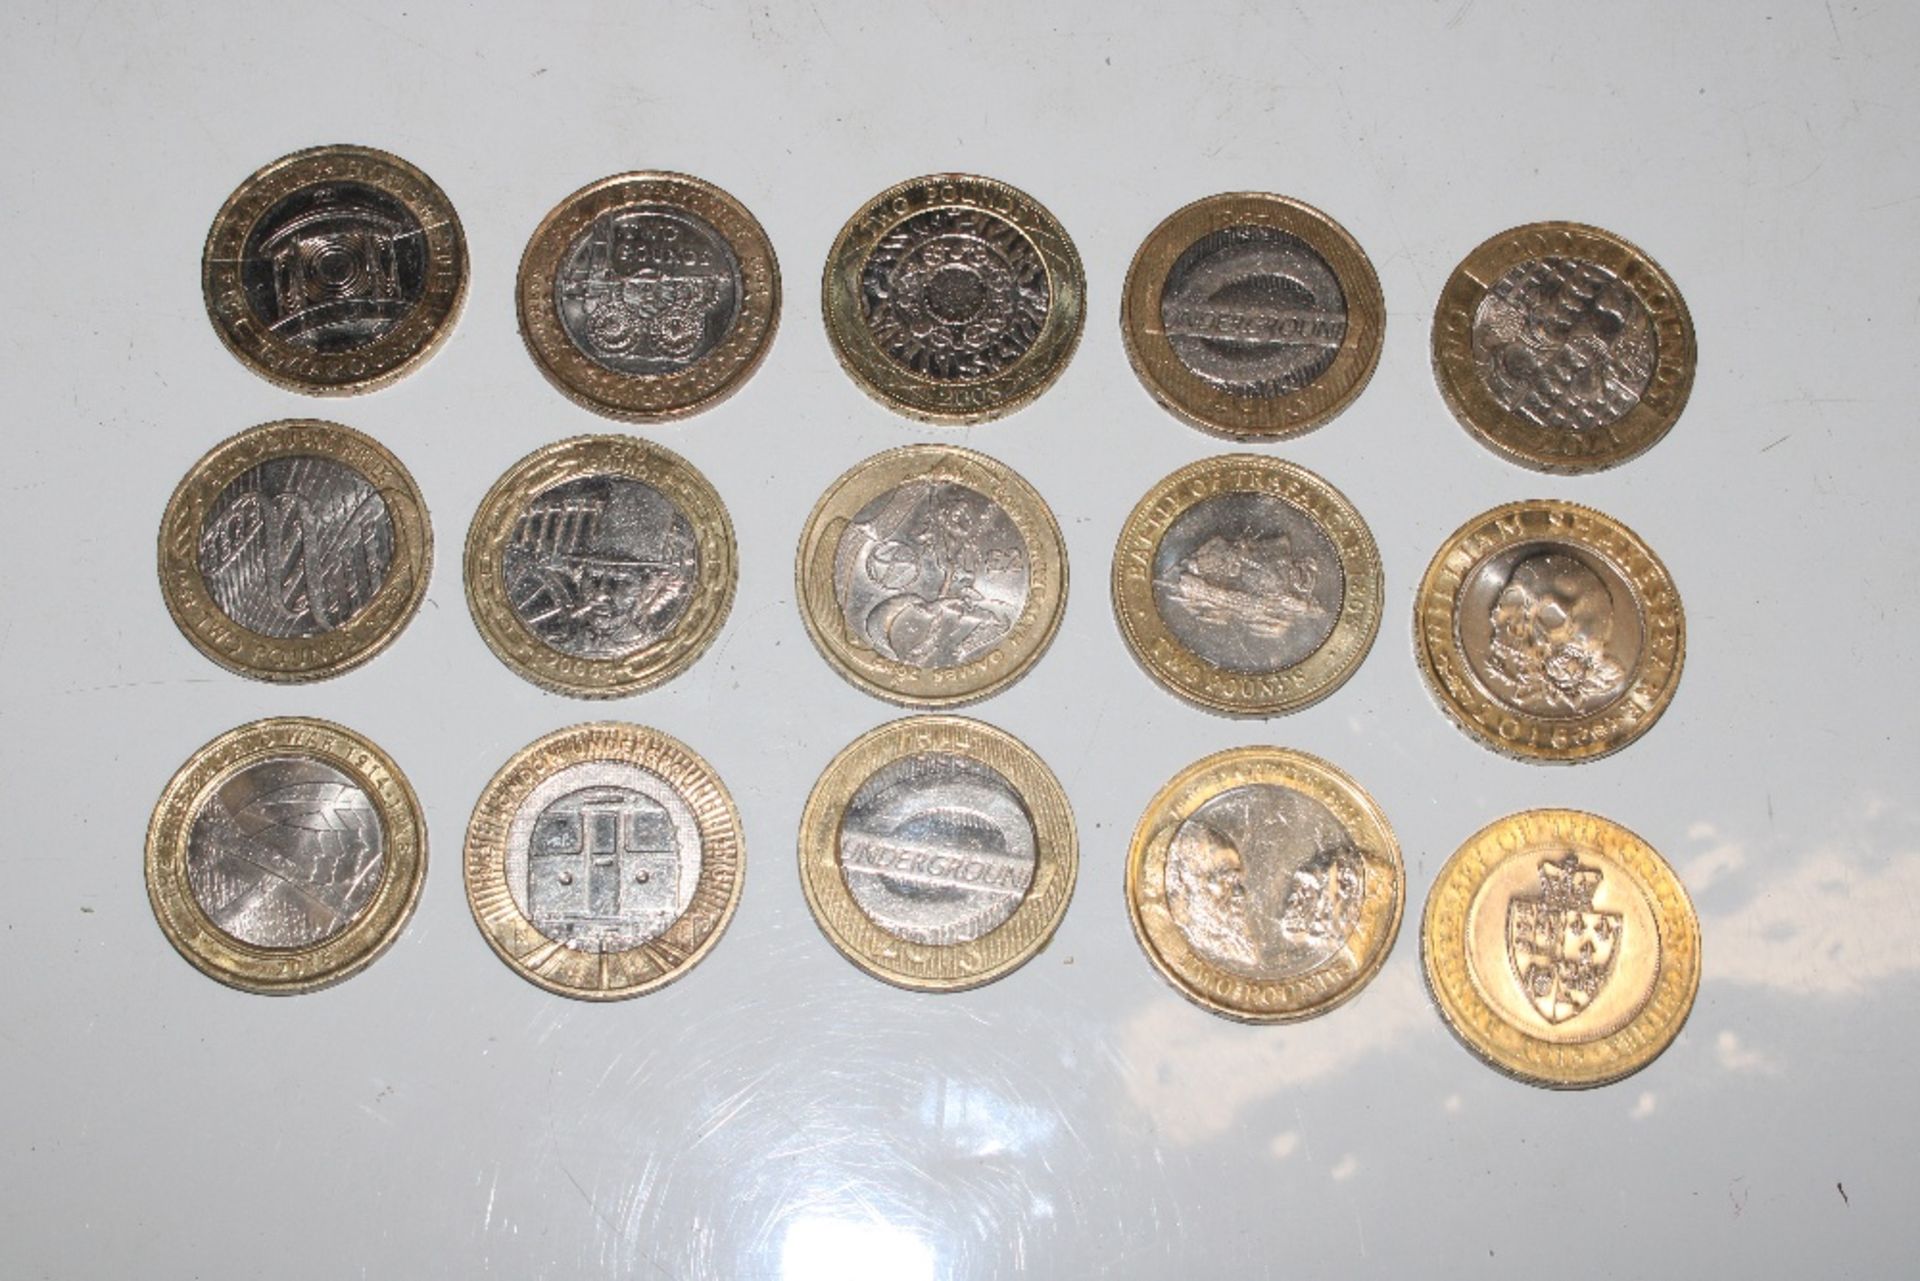 A bag of approx. 26 collector's £2 coins and colle - Image 2 of 3